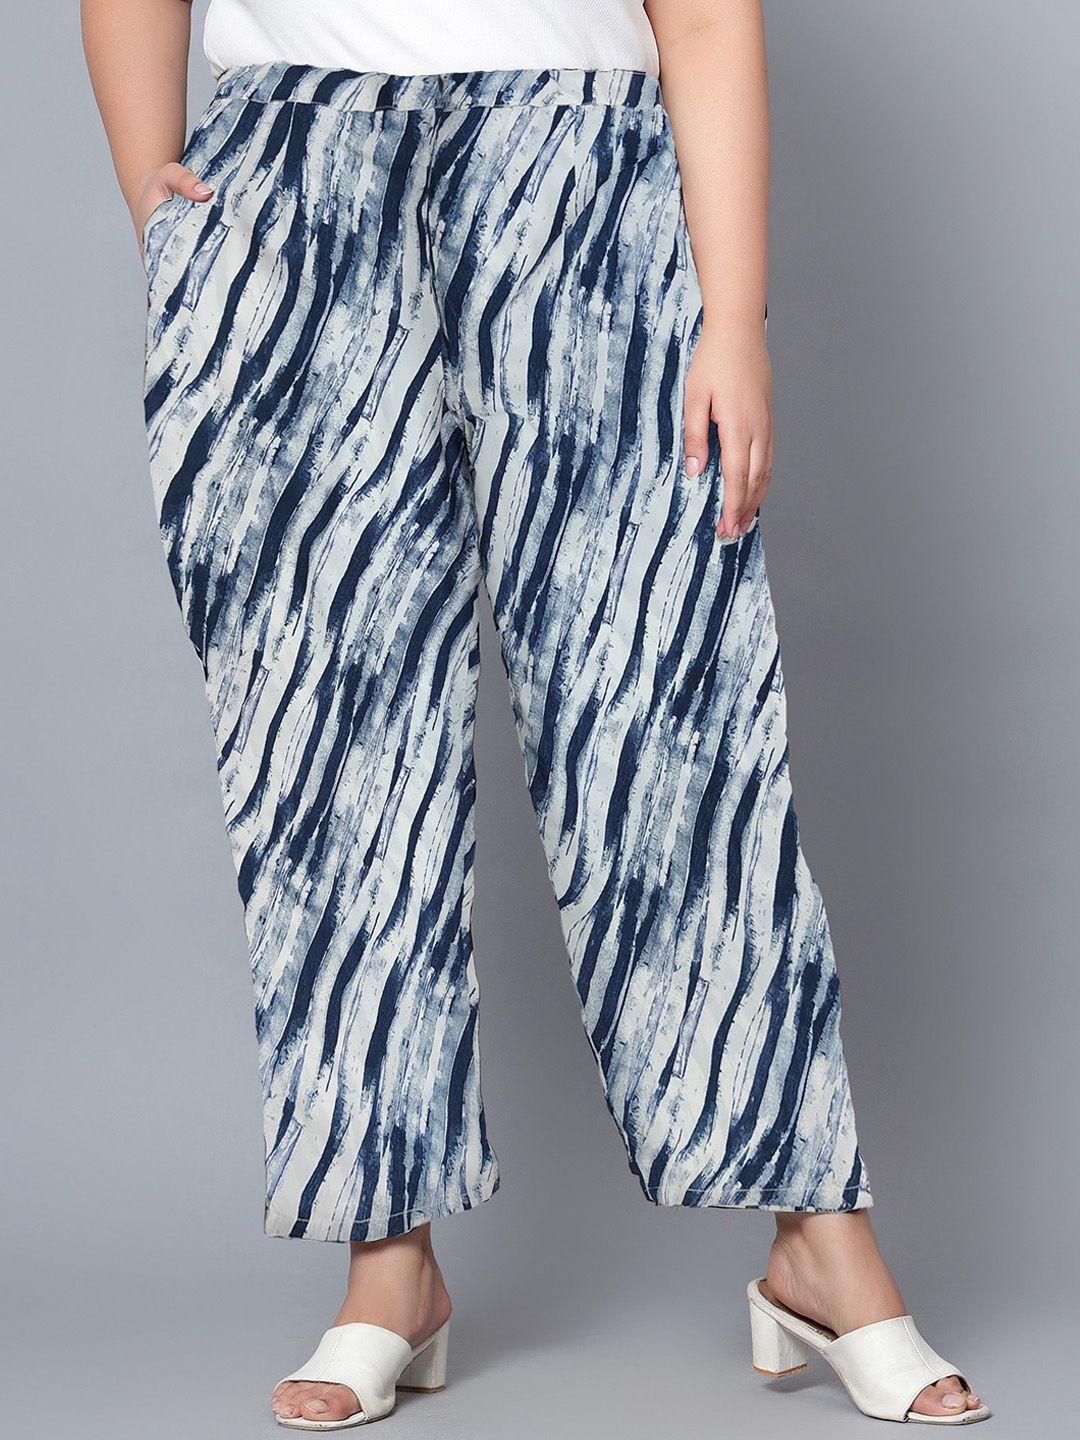 indietoga-women-comfort-abstract-printed-easy-wash-trousers